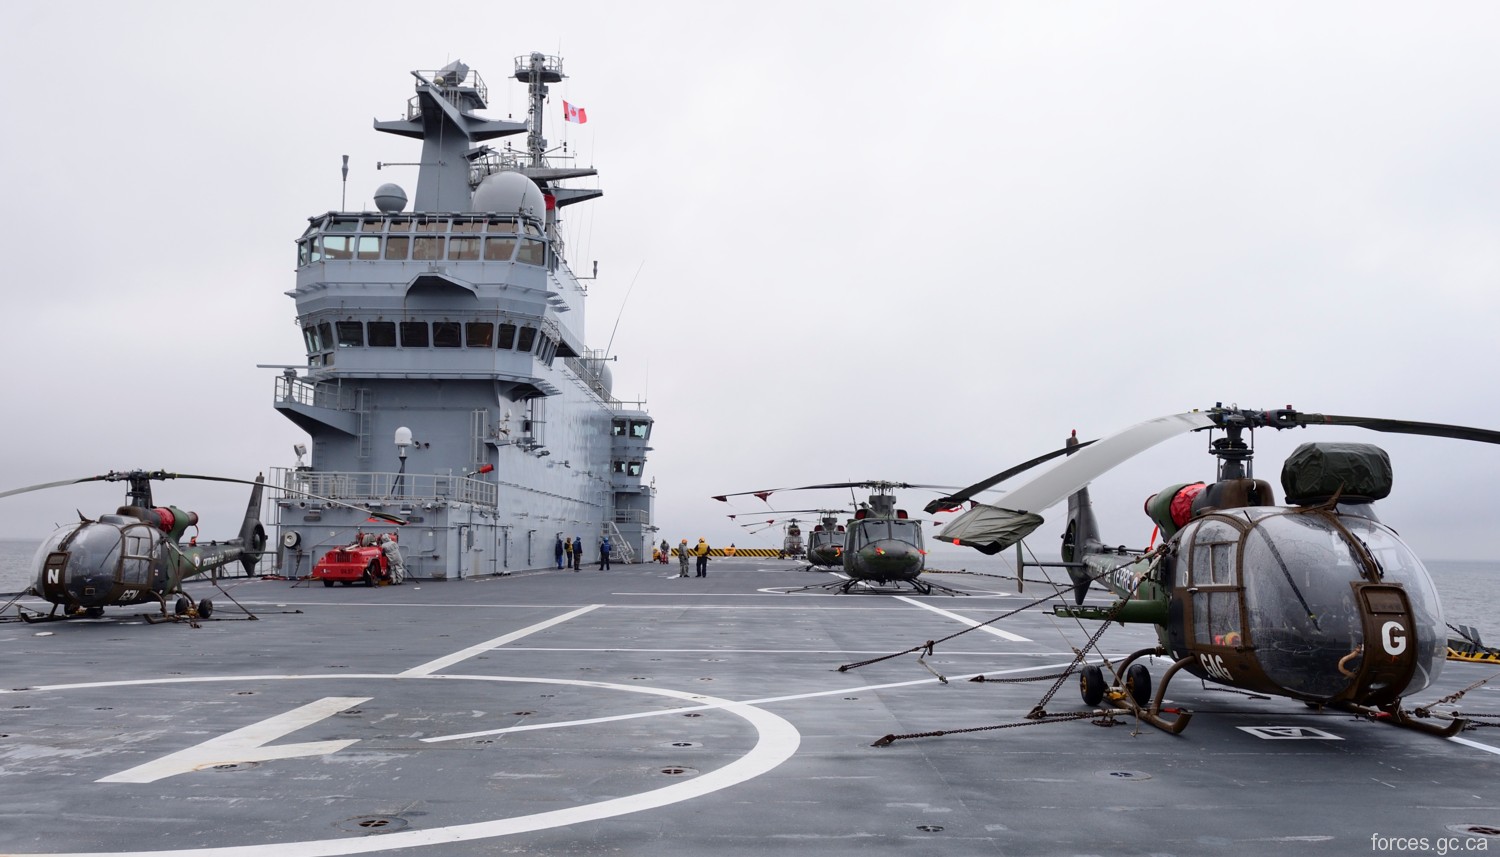 mistral class amphibious assault command ship lph bpc french navy marine nationale 42c flight deck helicopters